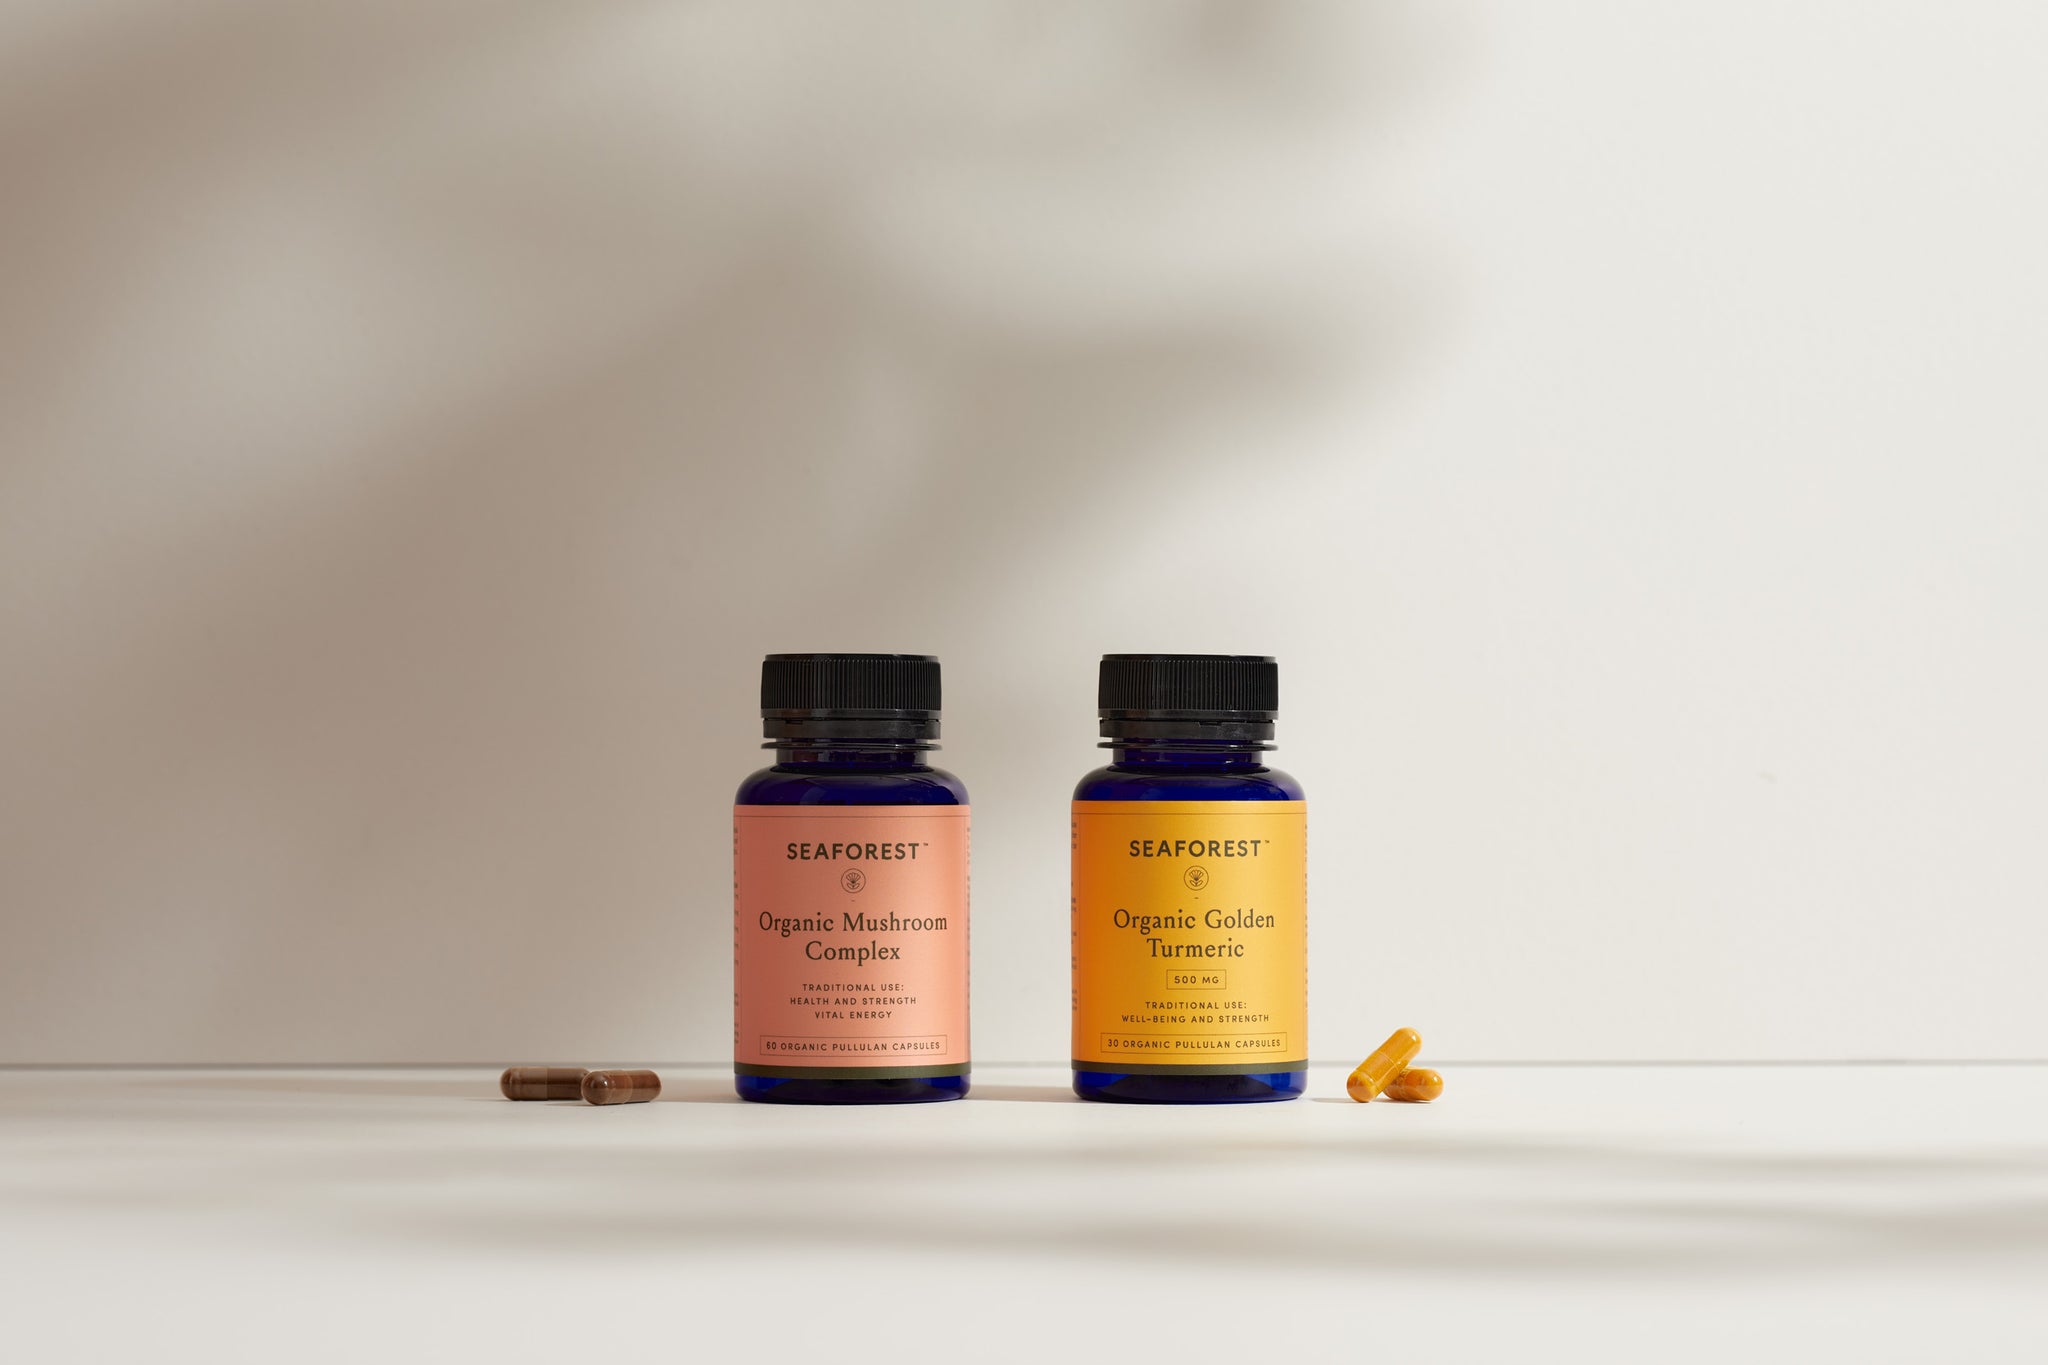 Organic Golden Turmeric contains curcuminoids, turmeric essential oils, and polysaccharides. Organic Mushroom Complex blends extracts from five varieties of certified organic and wildcrafted mushrooms.